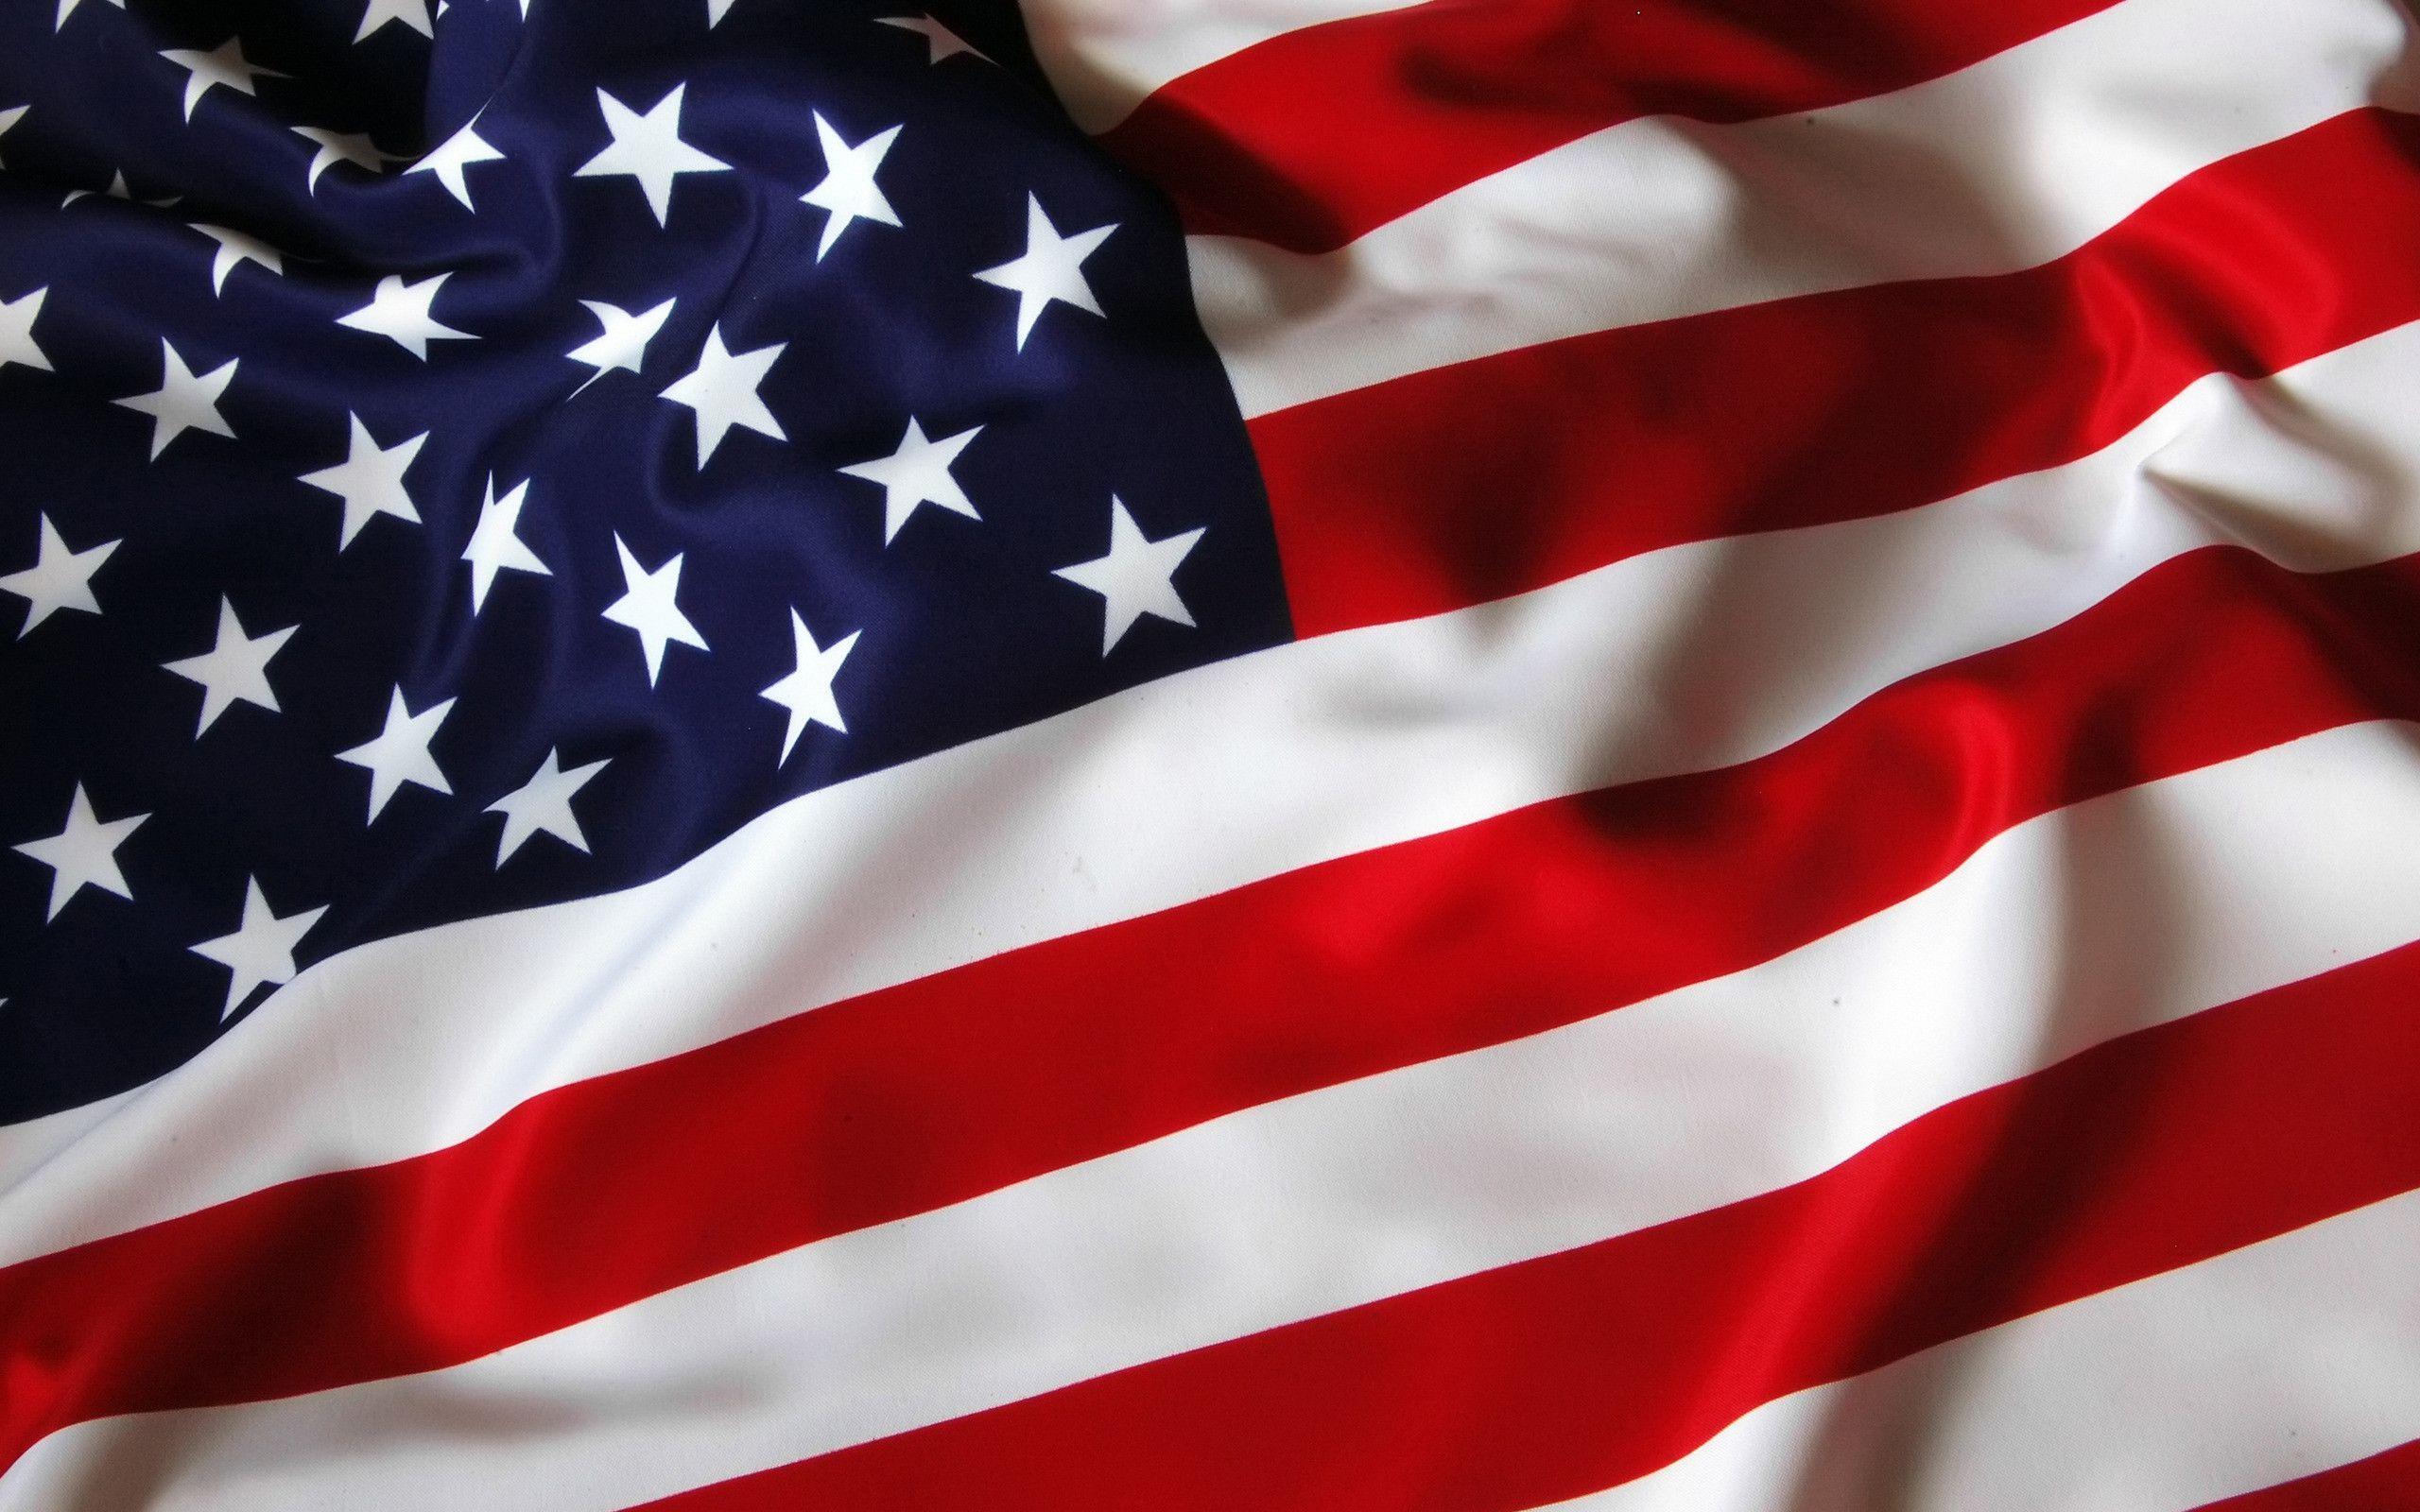 USA Flag Image for 4th of July 2017. United States Flag